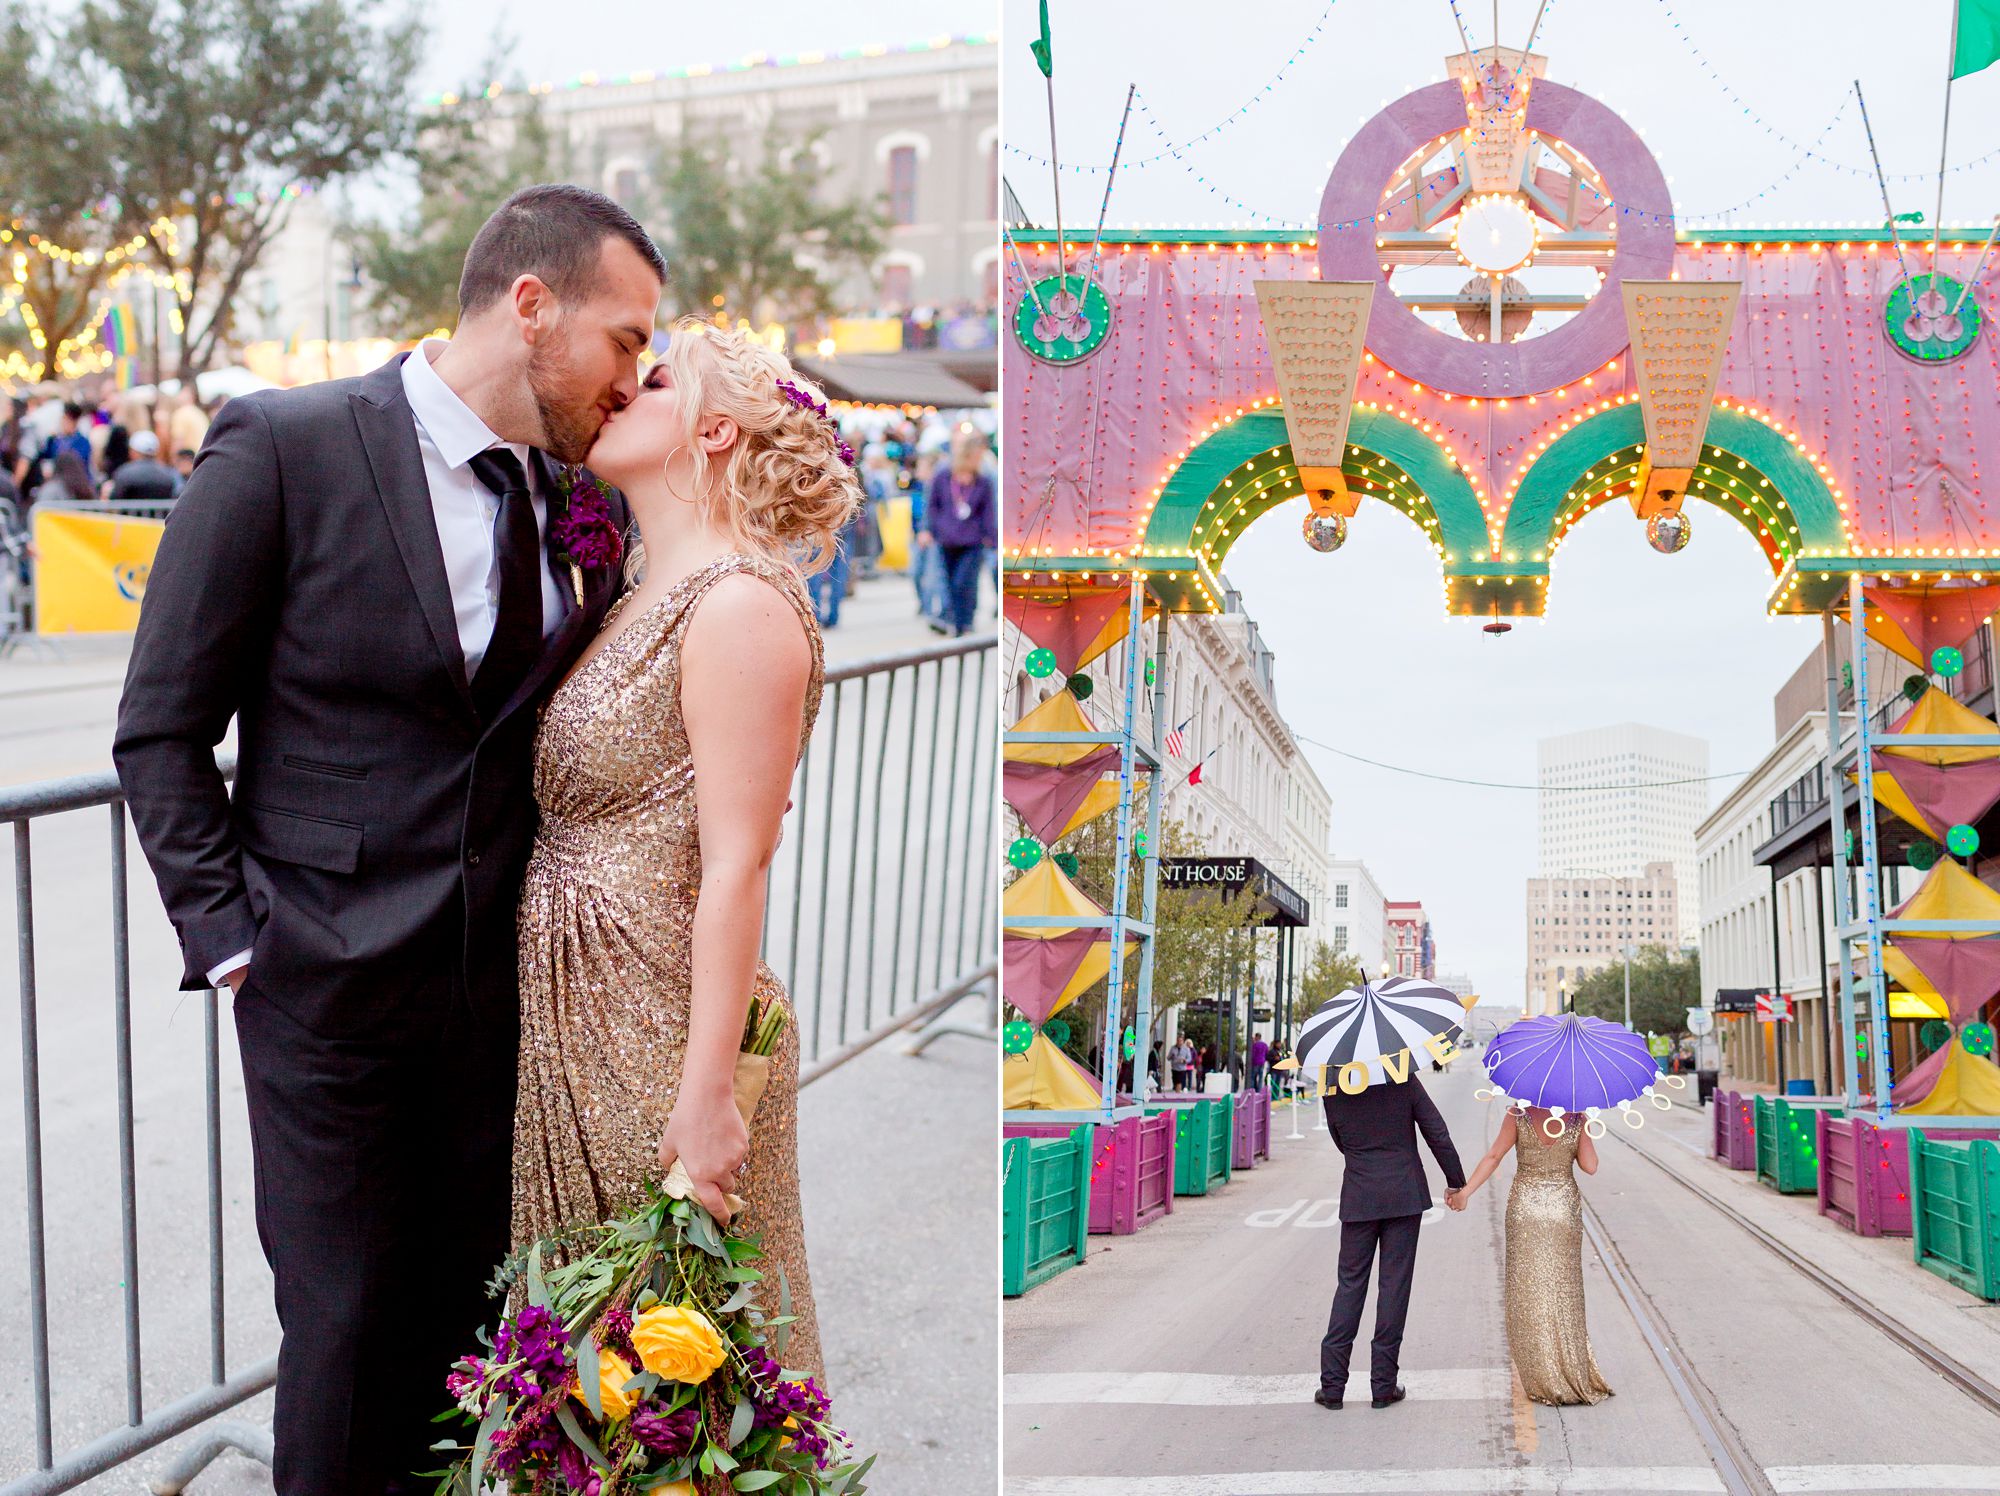 A bride and groom at their Mardi Gras elopement.